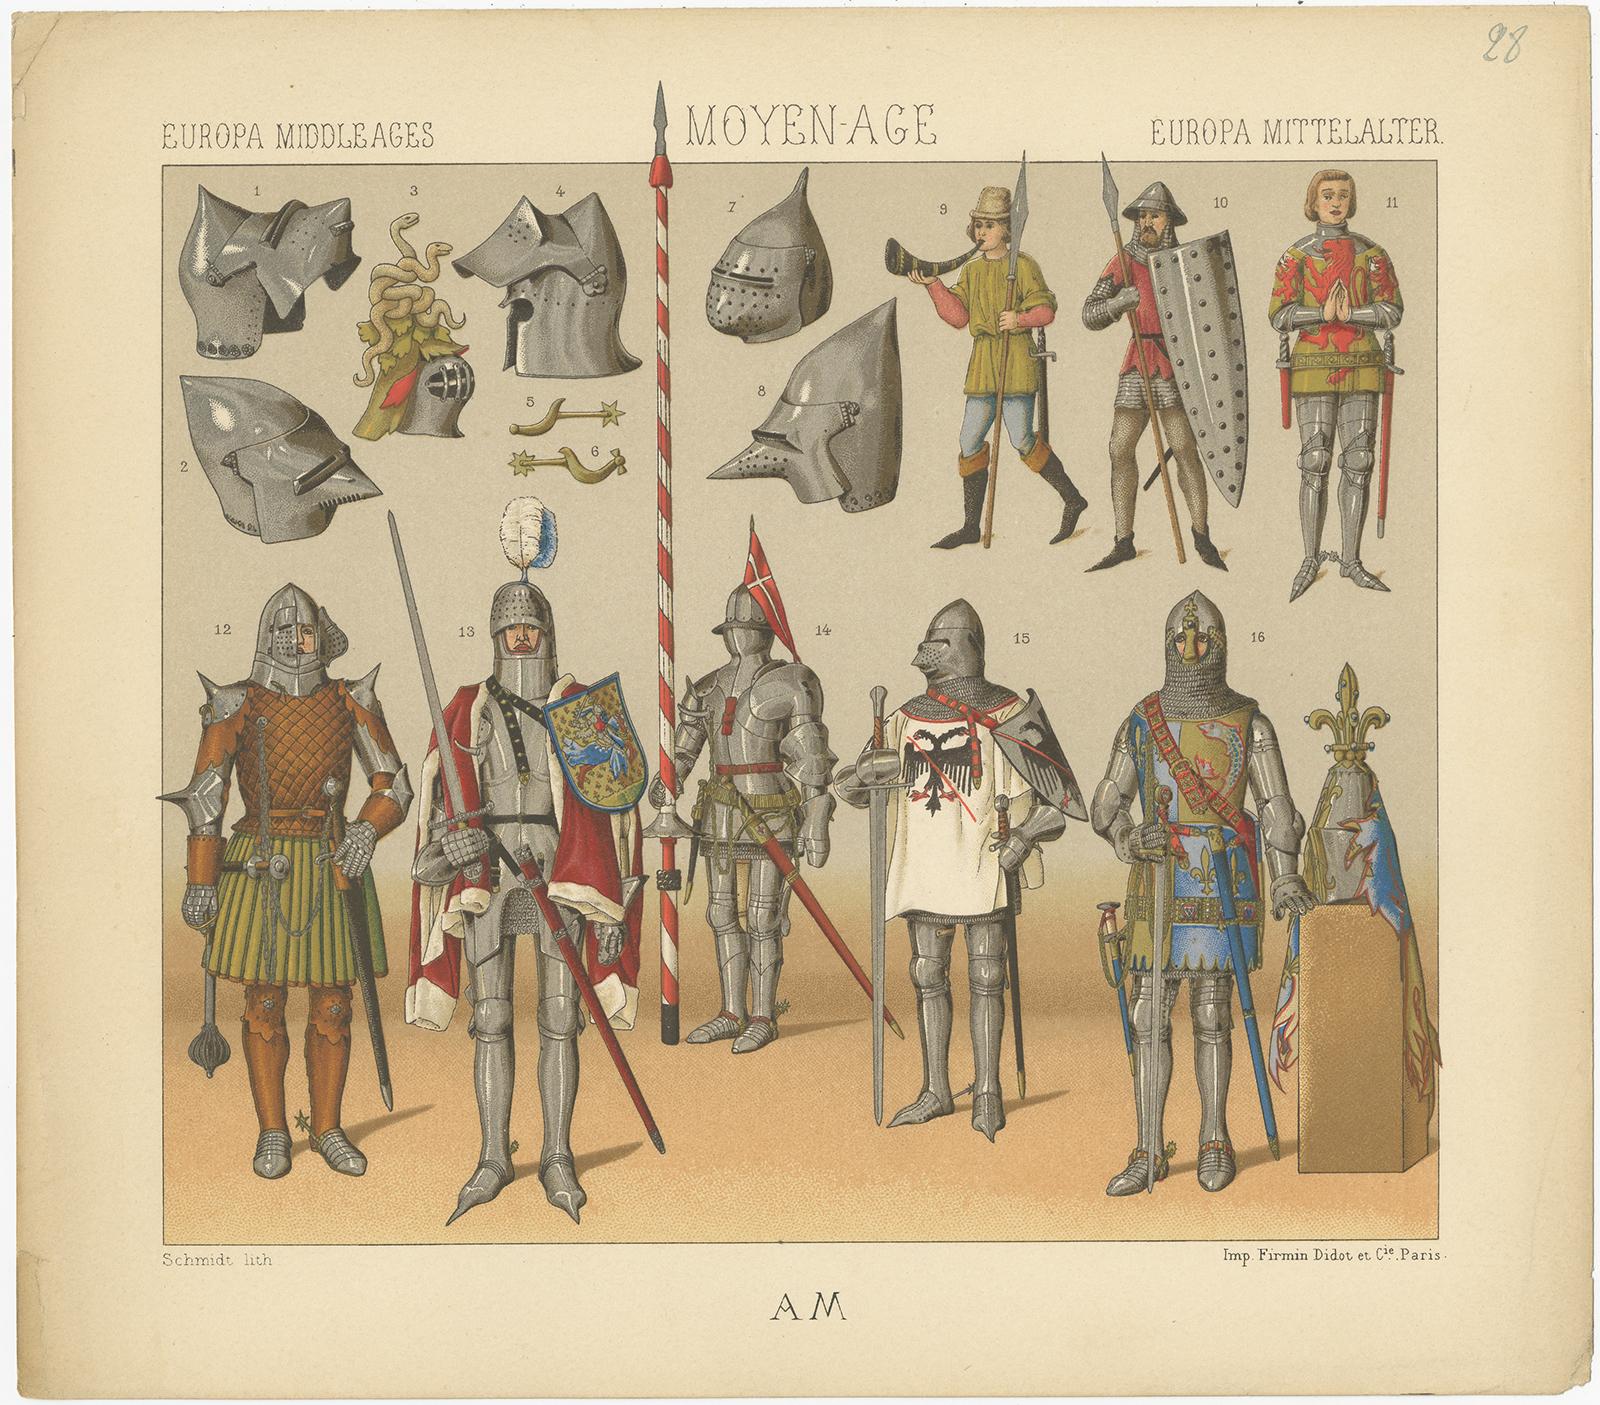 Antique print titled 'Europa Middle Ages - Moyen Age - Europa Mittelalter'. Chromolithograph of European Middle Ages Armament'. This print originates from 'Le Costume Historique' by M.A. Racinet. Published circa 1880.